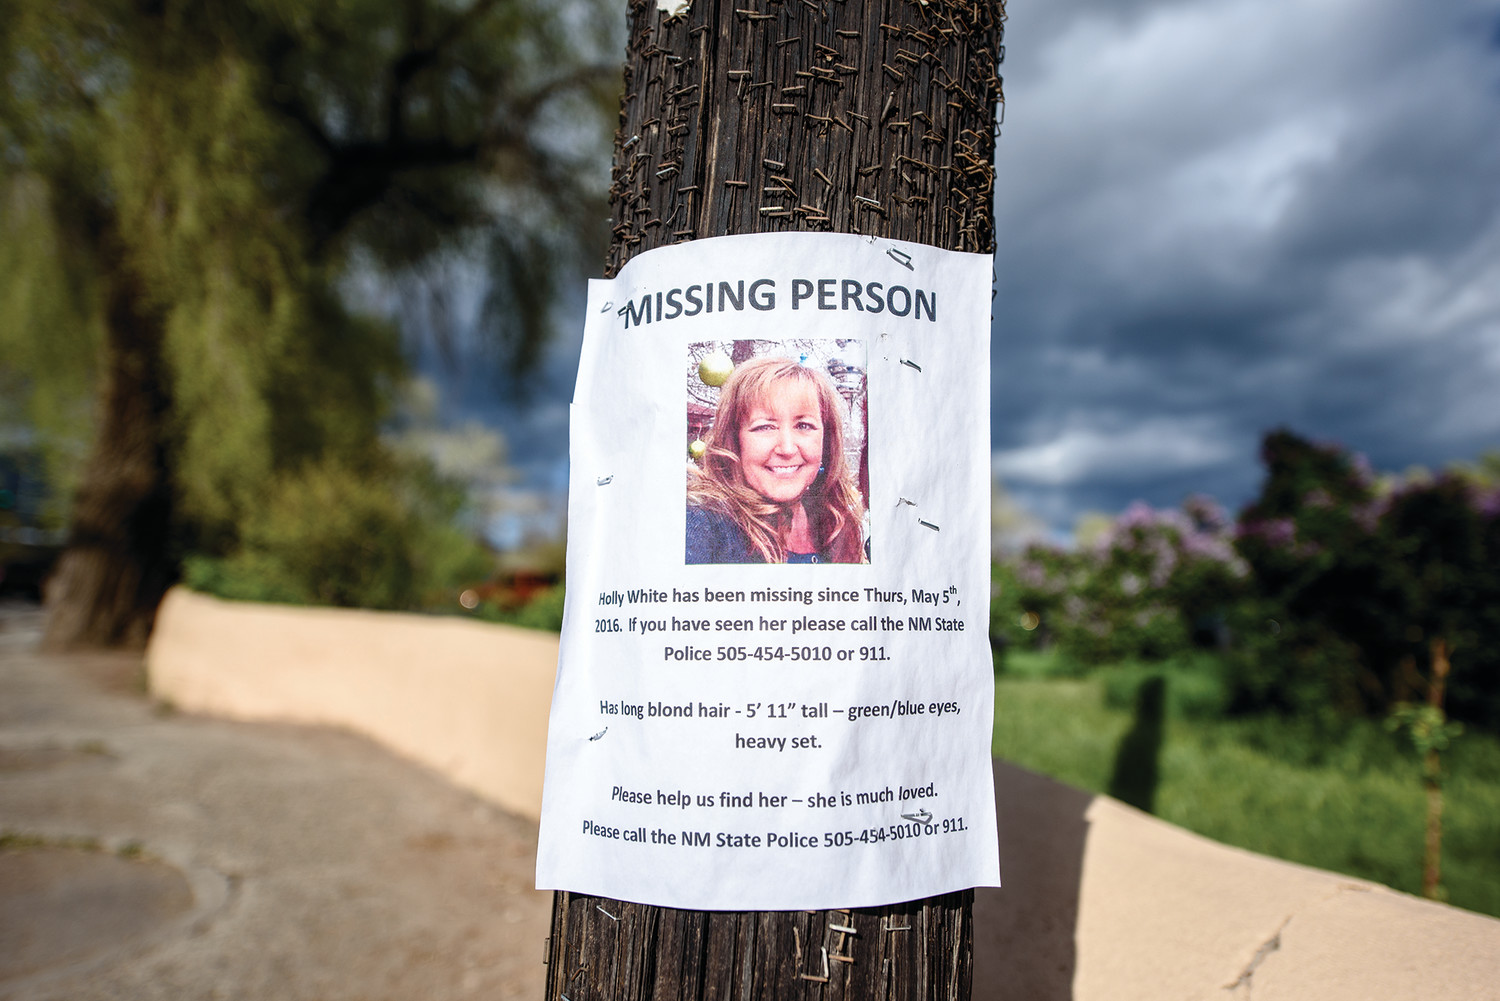 5 Things You Must Know When Reporting A Missing Person In South Africa